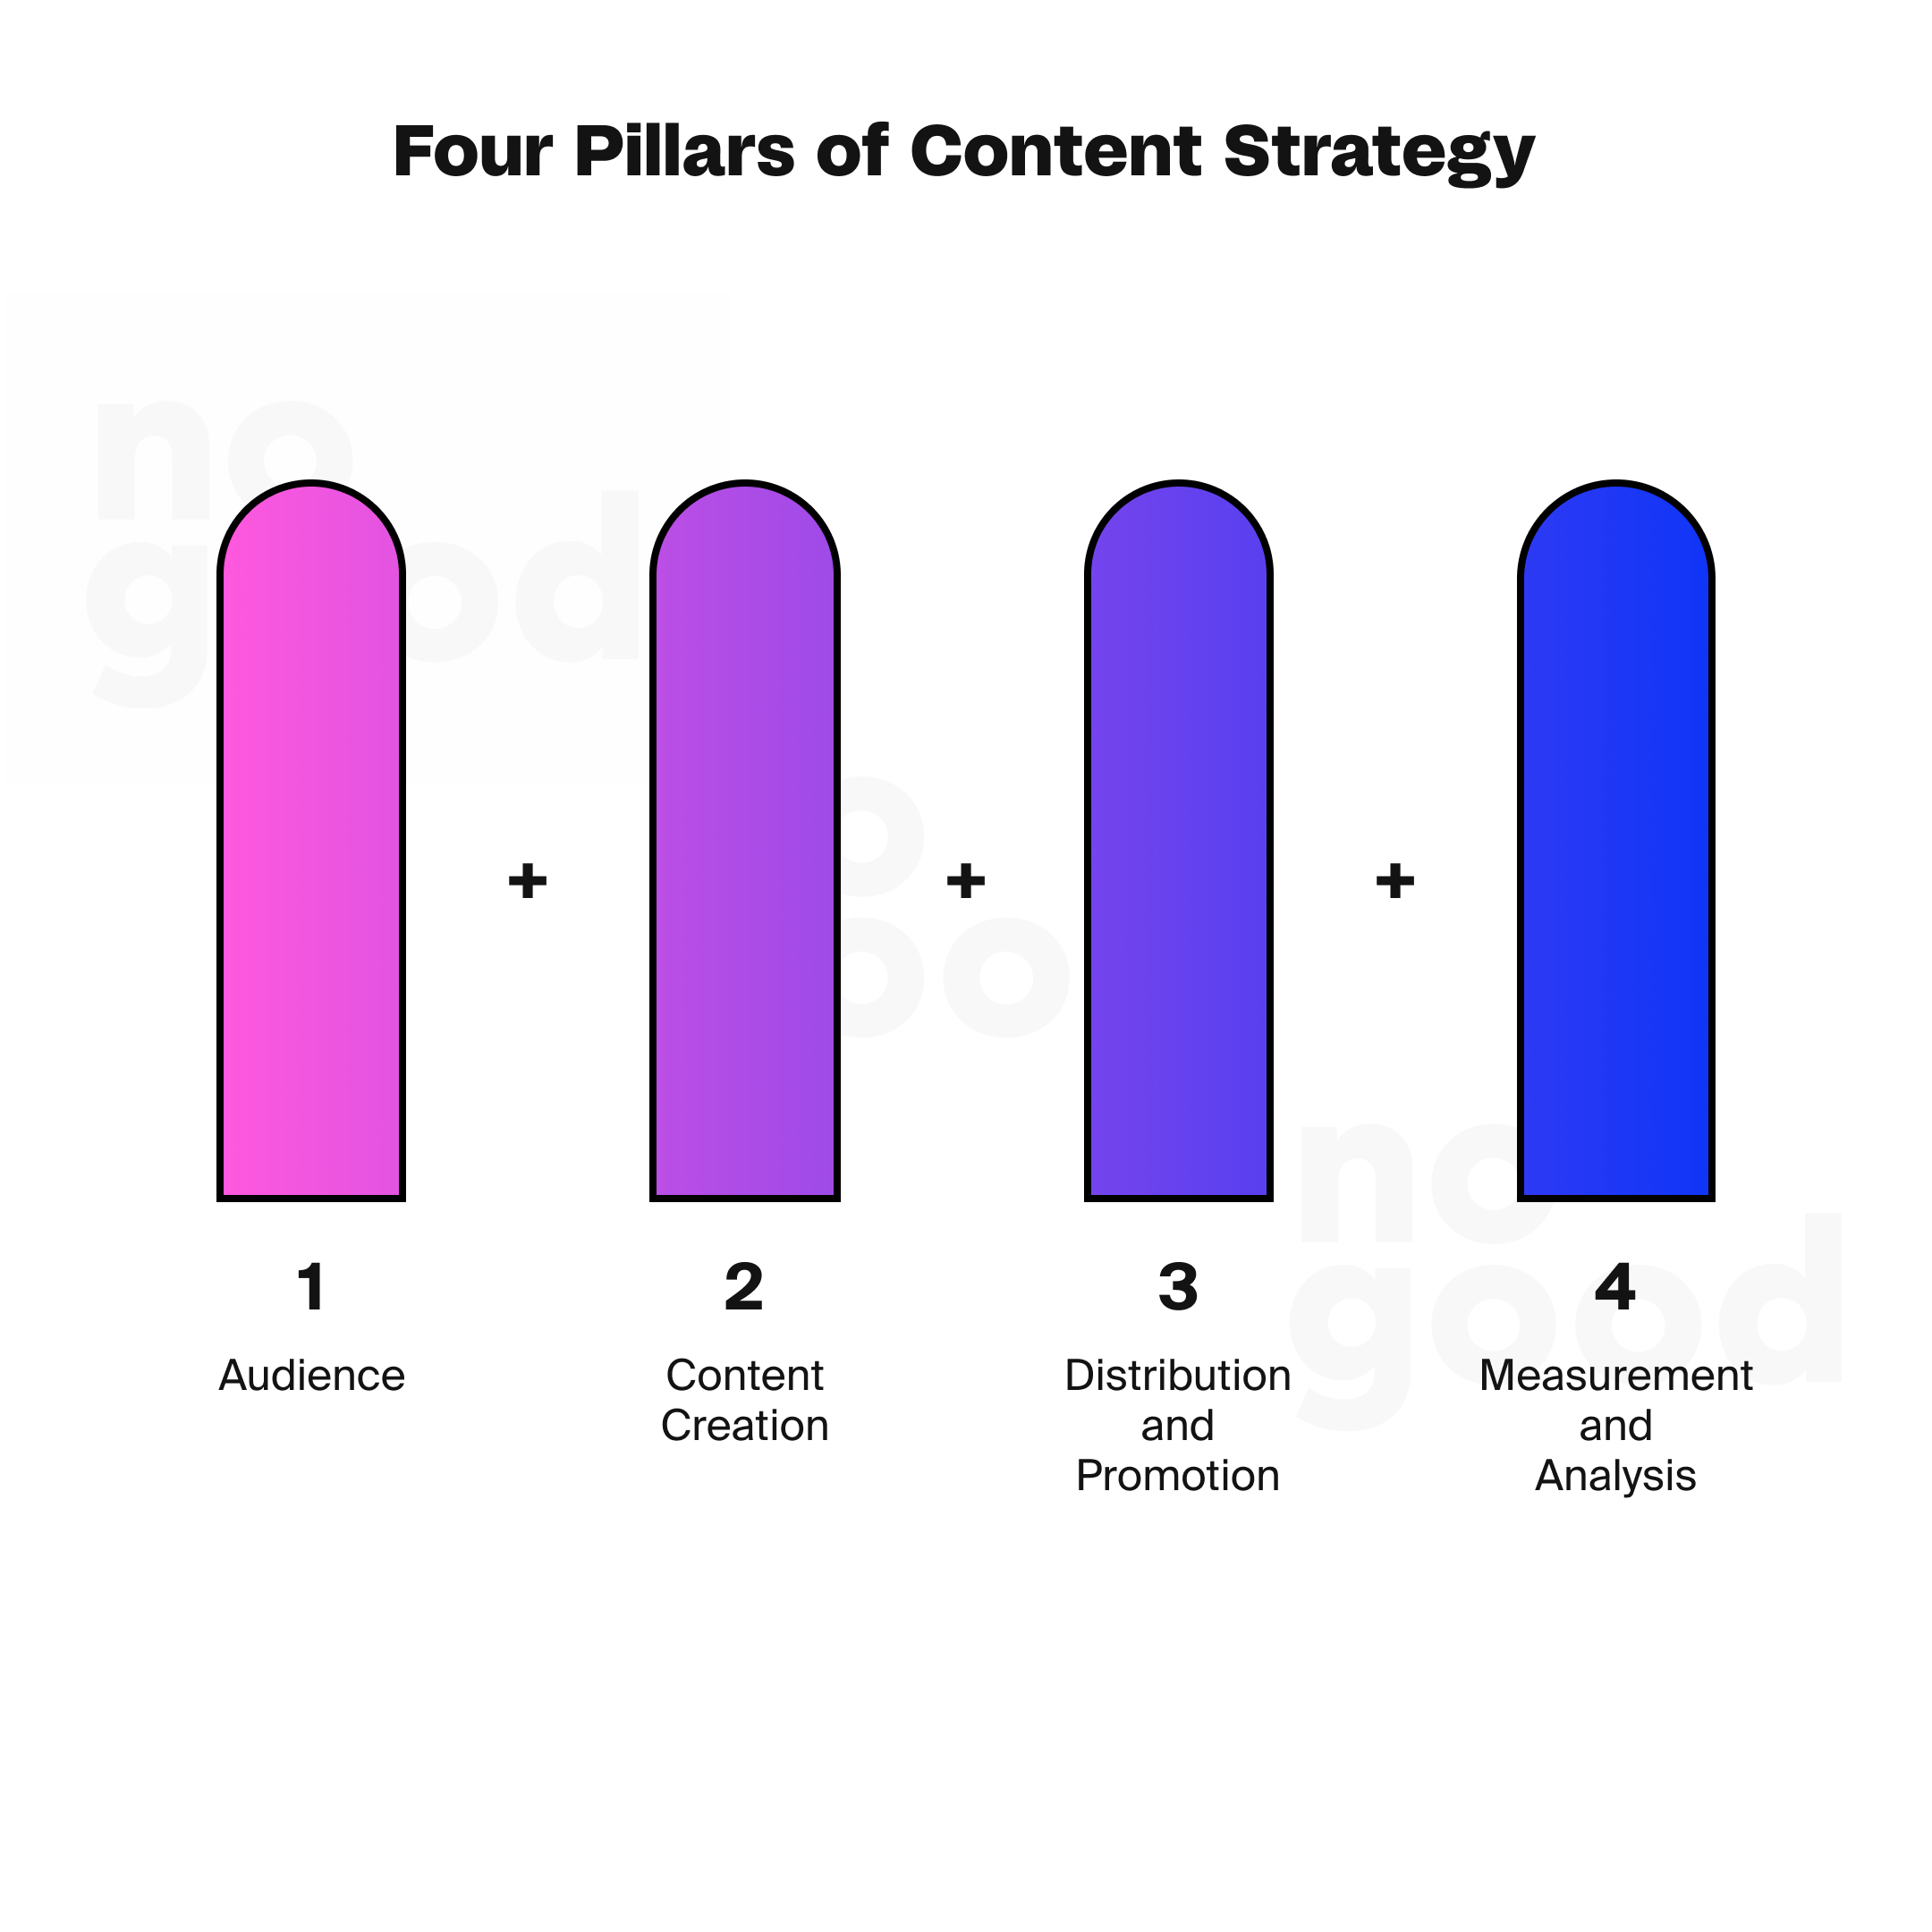 The four pillars of a content strategy: 1. Audience 2. Content creation 3. Distribution and promotion 4. Measurement and analysis